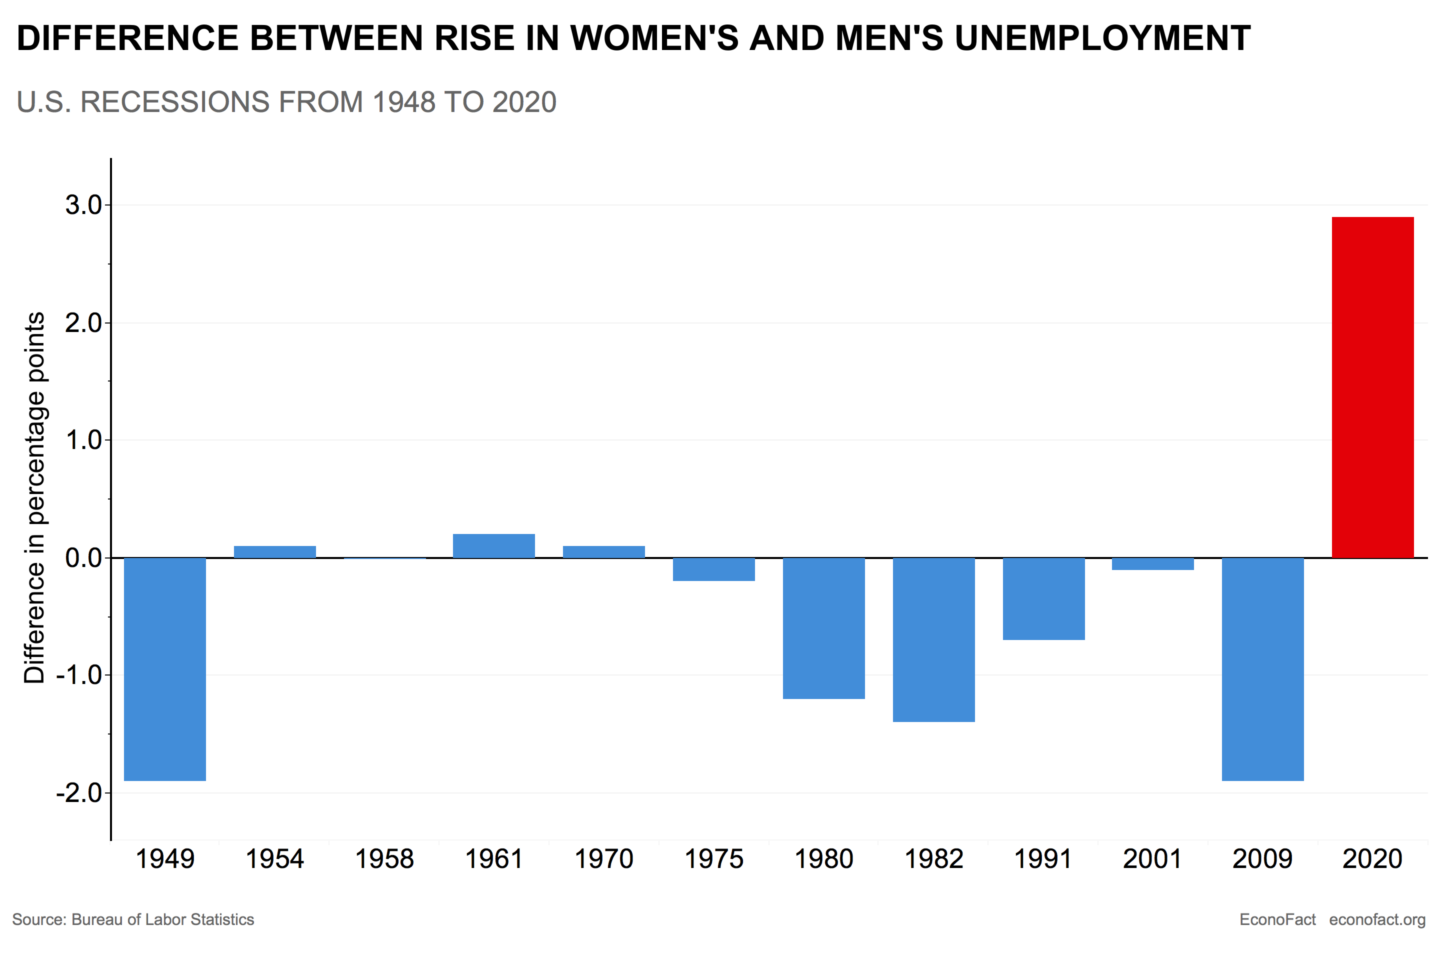 Impact of the Covid-19 Crisis on Women’s Employment